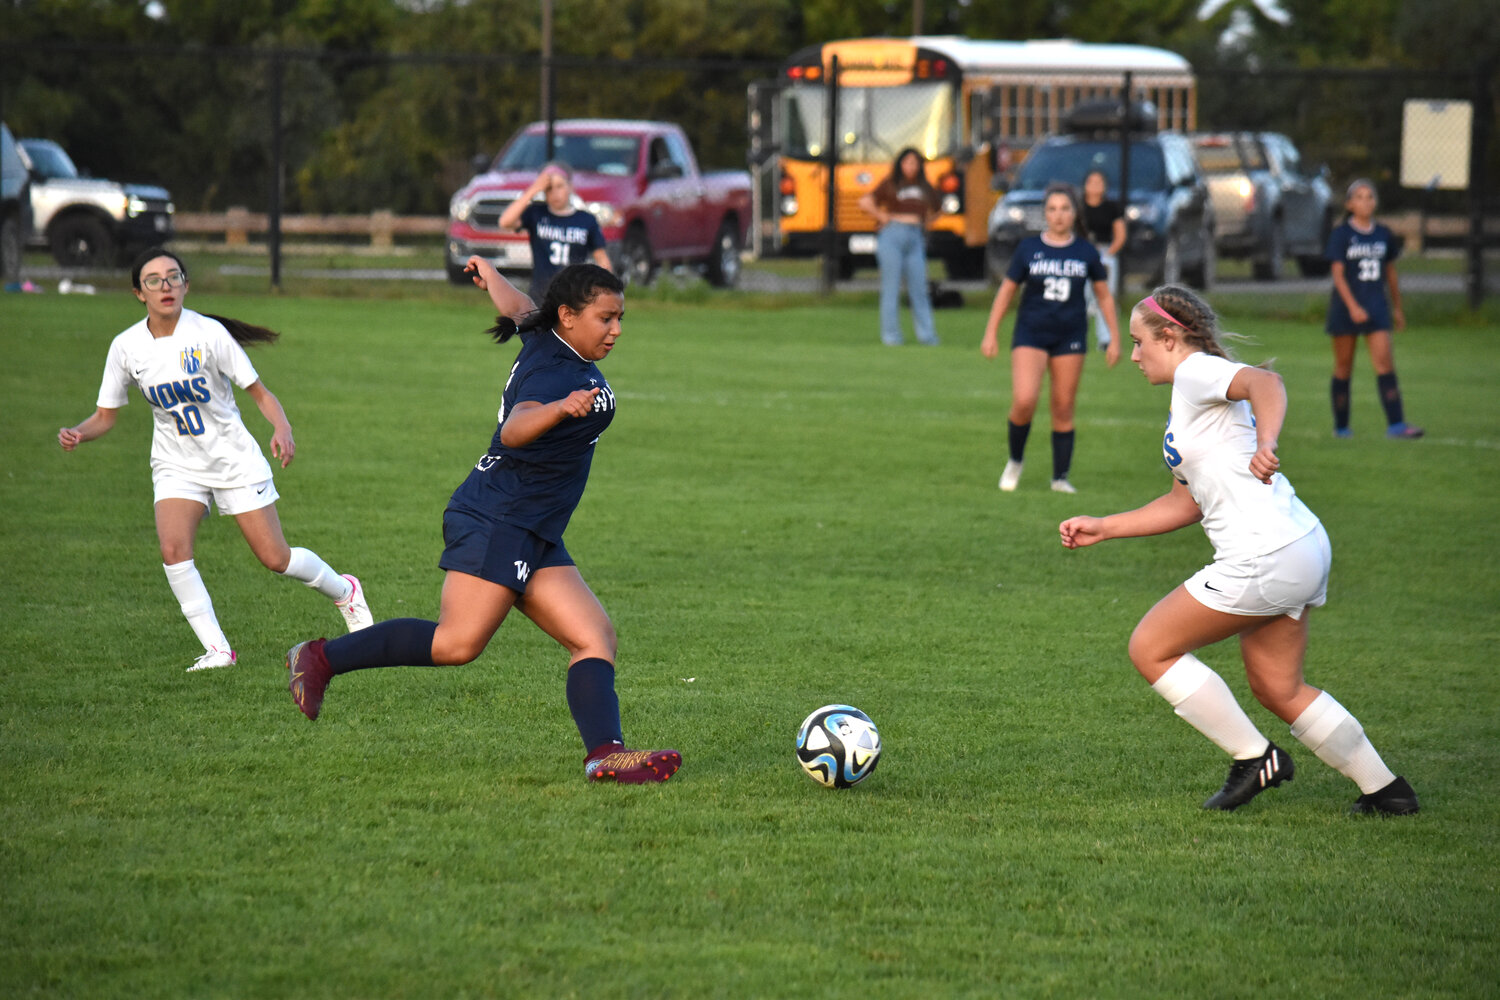 Mariana Rauda, left, and a St. John Paul II player go for a loose ball in their Sept. 21 game.